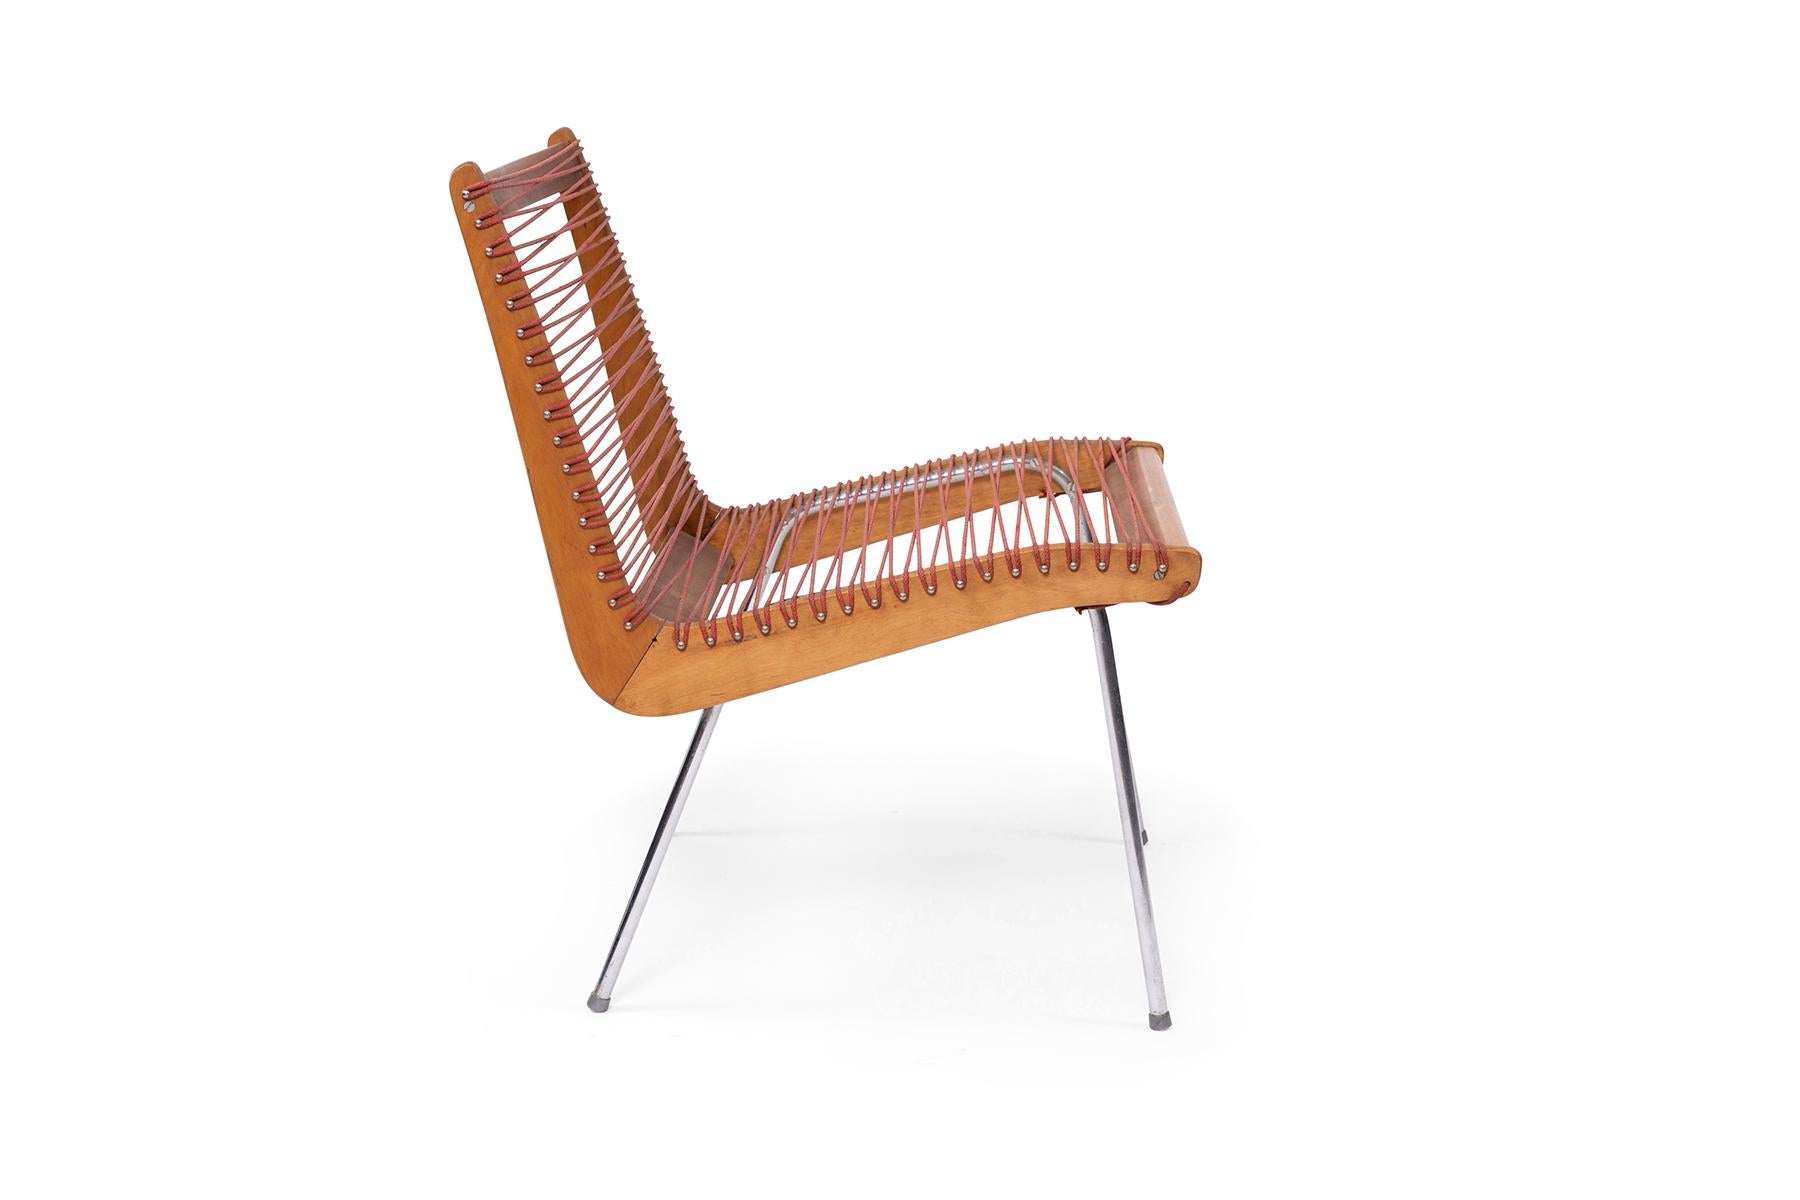 Robert J. Ellenberger for Calfab furniture Company, Los Angeles California. This design was selected for the MOMA good Design exhibition in 1950. The knock down side chair, solid hardwood frame strung with original red cording was shown next to a